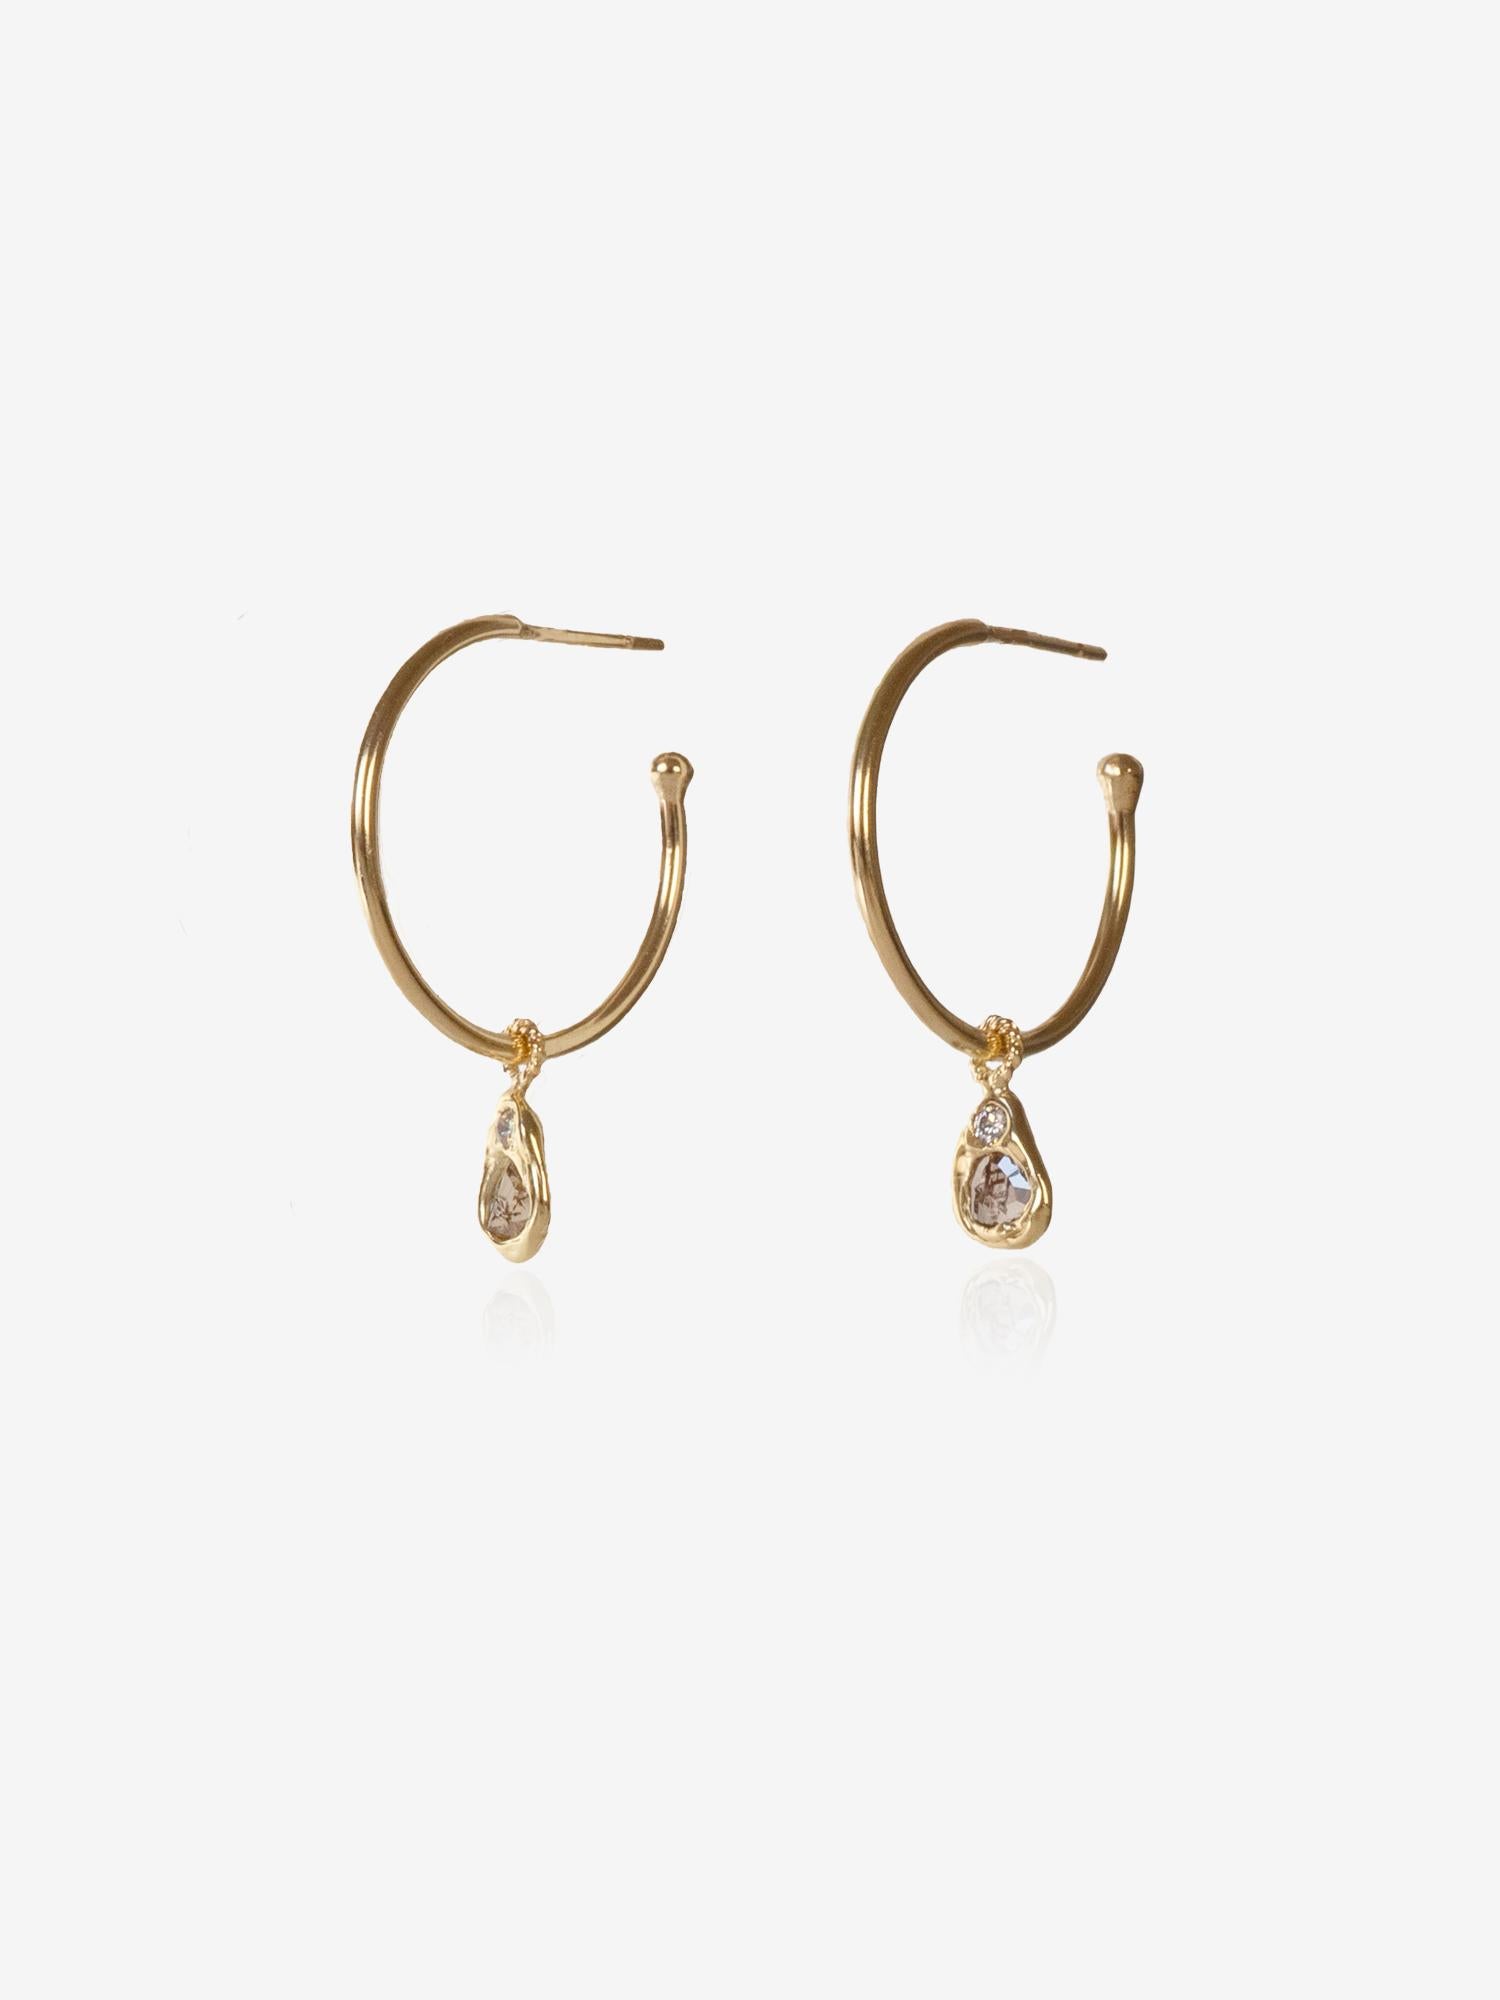 Your new favorite hoops. Lightweight and ultra comfortable, these hoops come with removable charms.  Charms feature rose-cut diamond slices and 1.2mm-1.5mm ethically sourced round diamonds. Wear them with or without charms for a versatile look. 
•